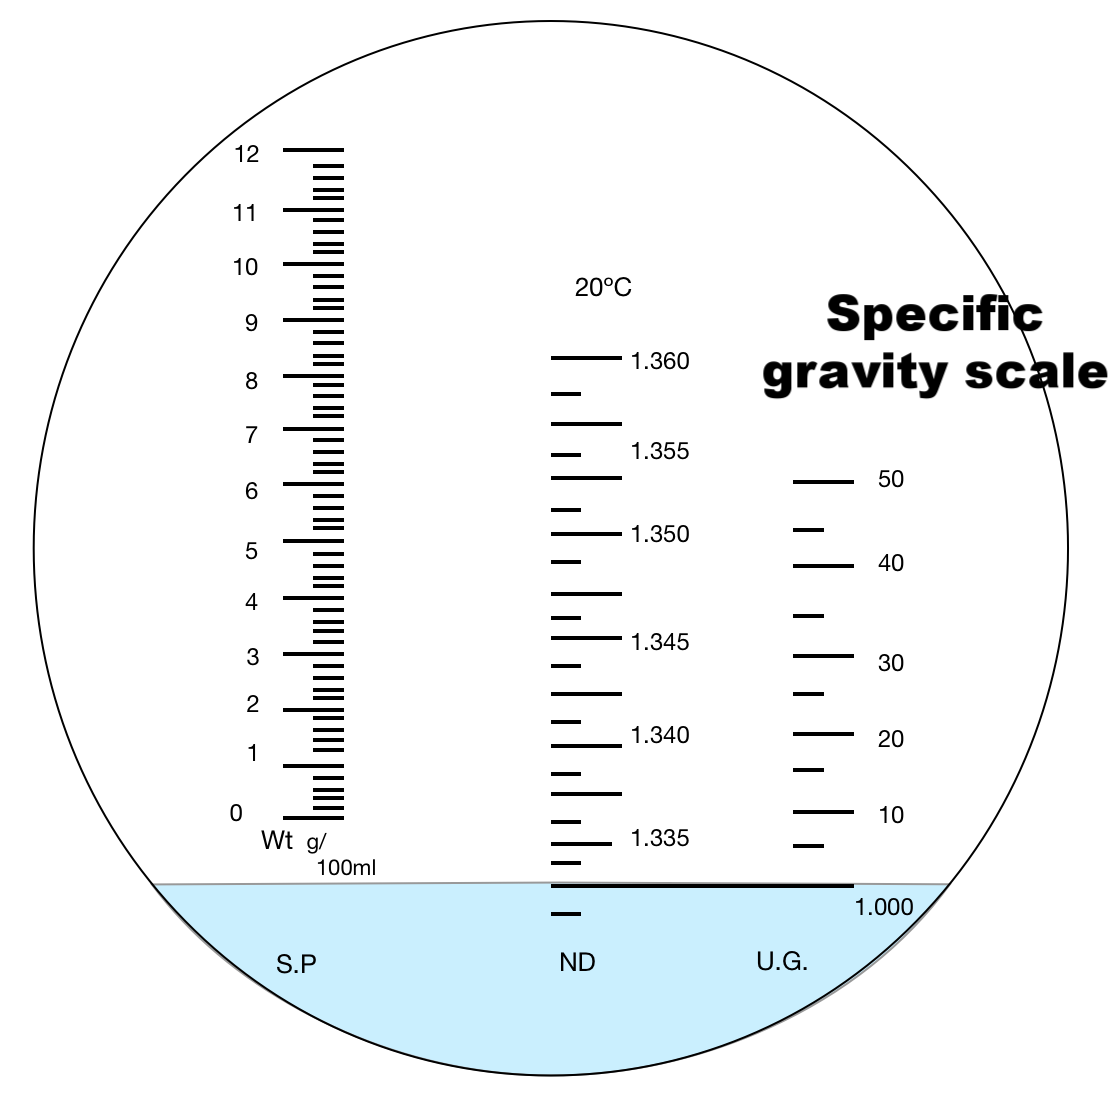  A correctly calibrated refractometer with distilled water giving a reading of 1.000 on the specific gravity (U.G.) scale 